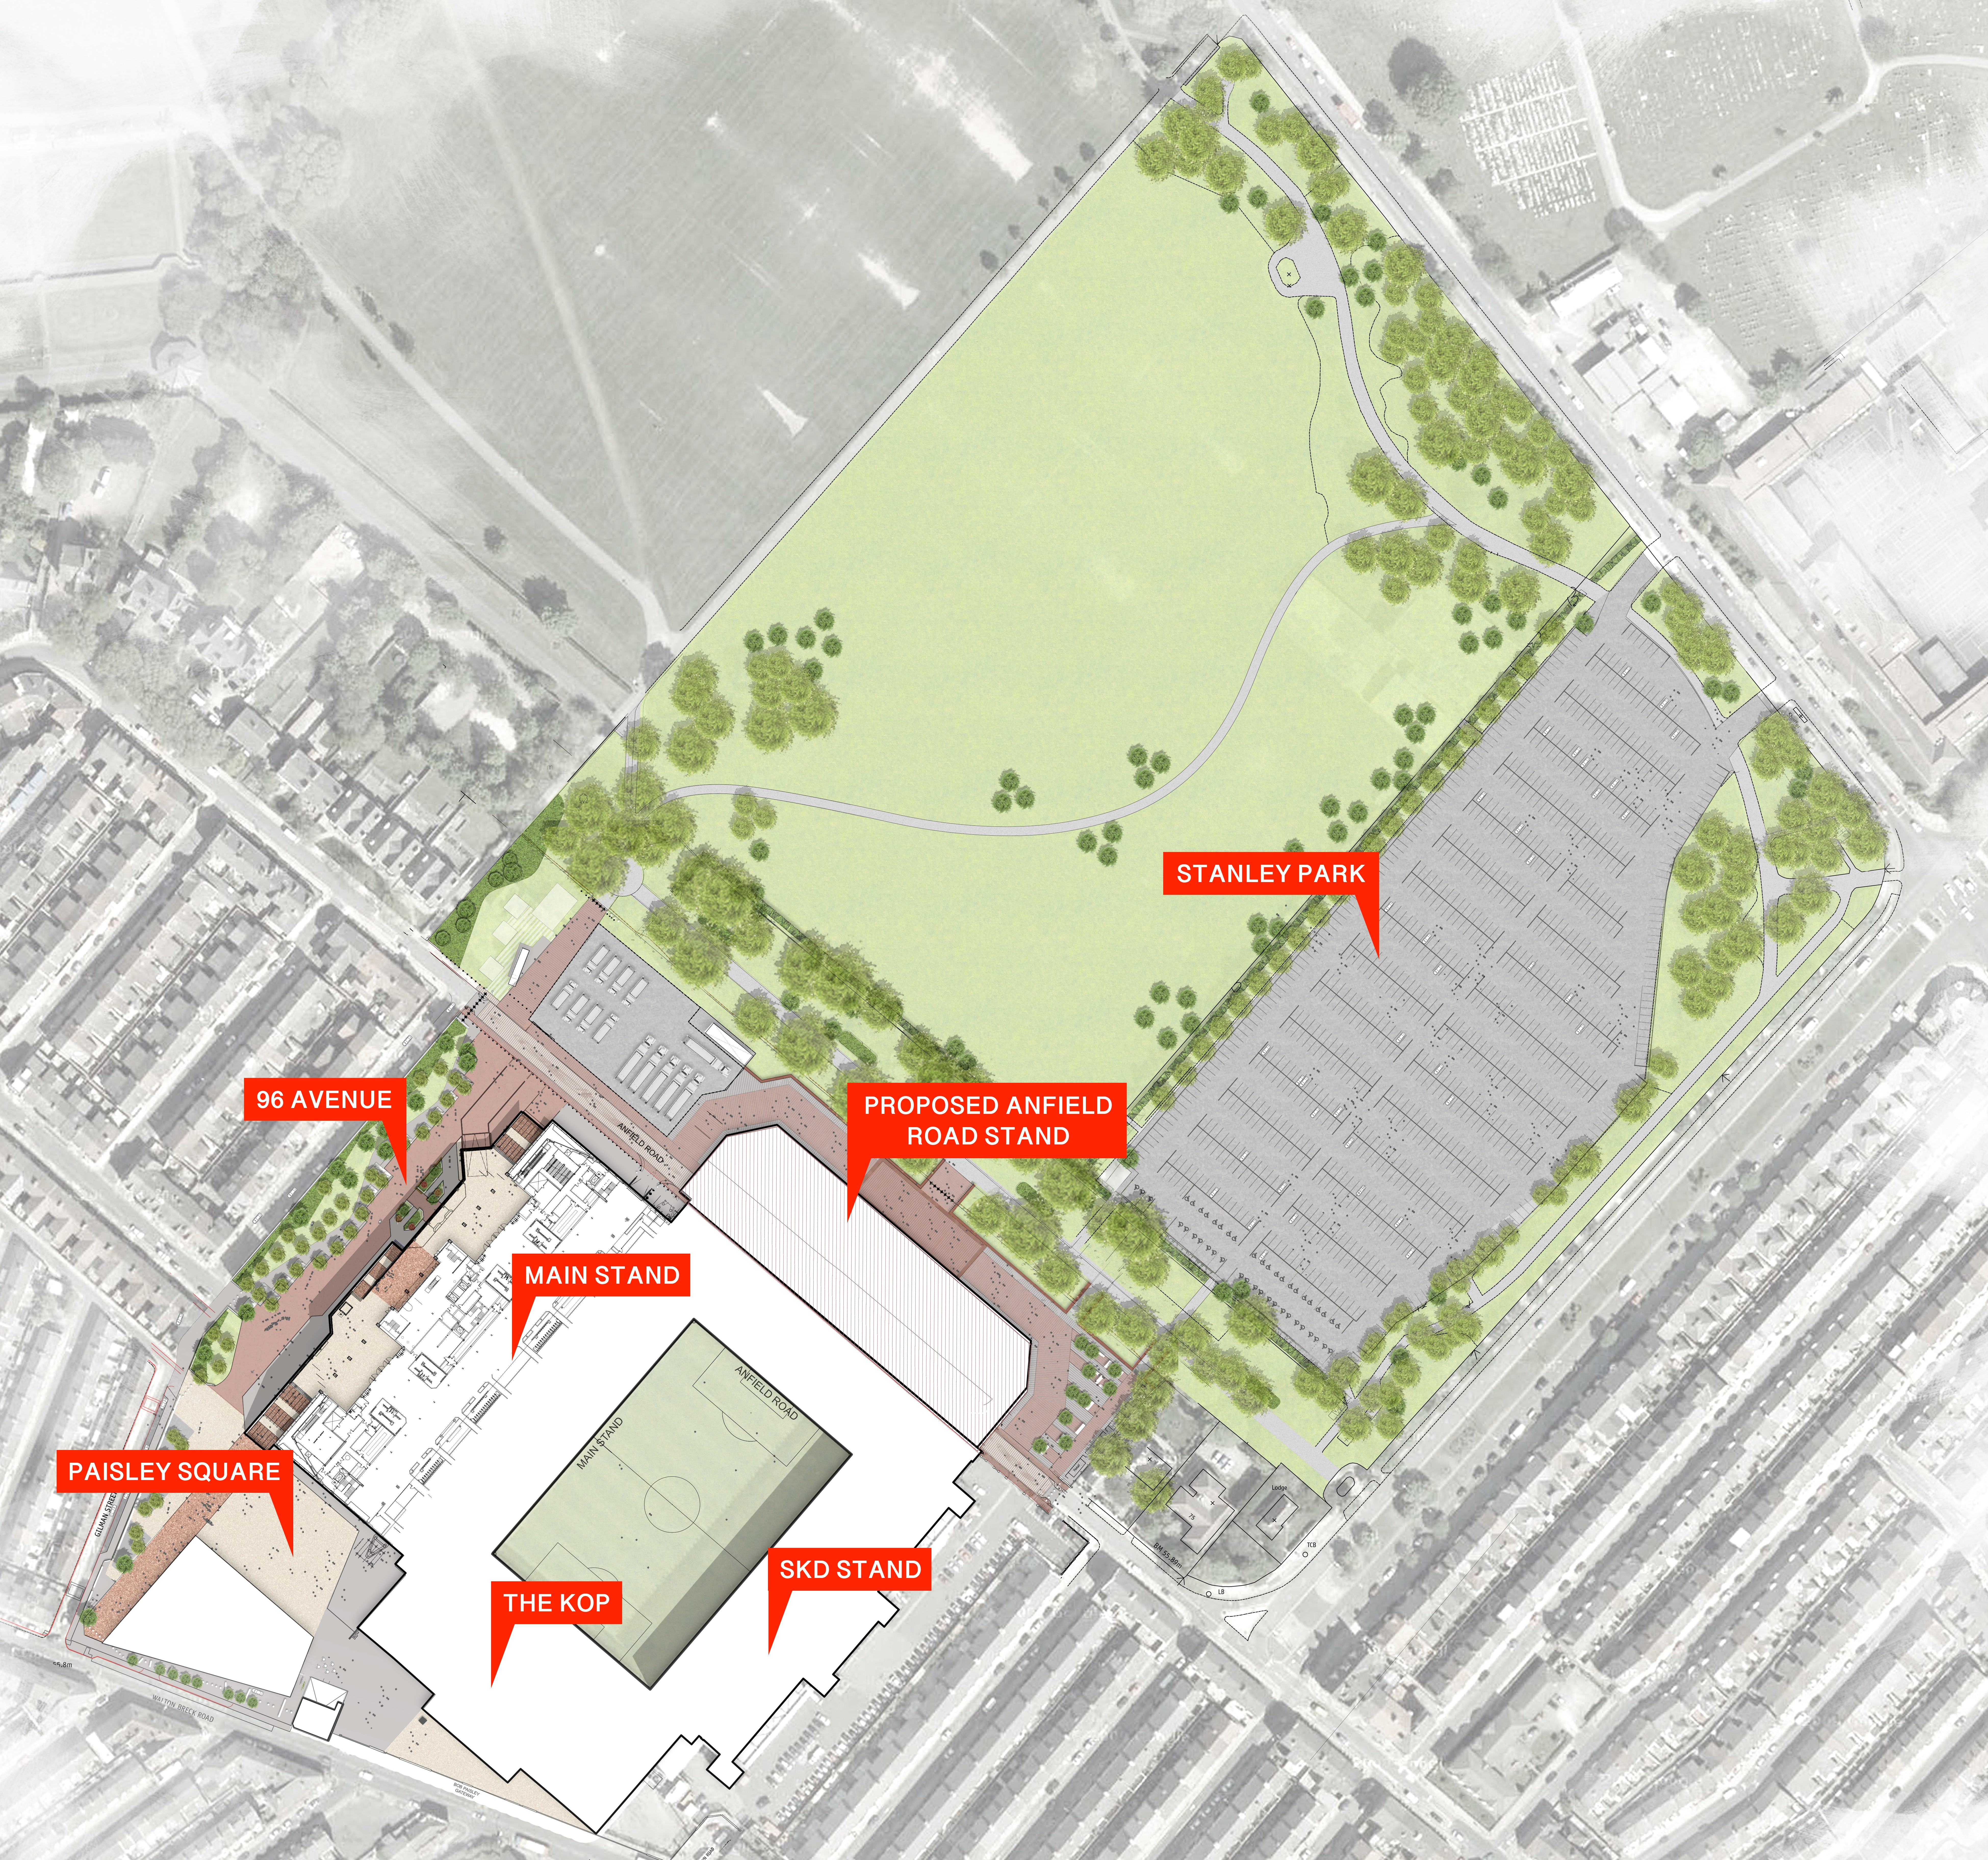 Liverpool's plans for redevelopment of Anfield will see the stadium extended towards Stanley Park, closing a section of Anfield Road